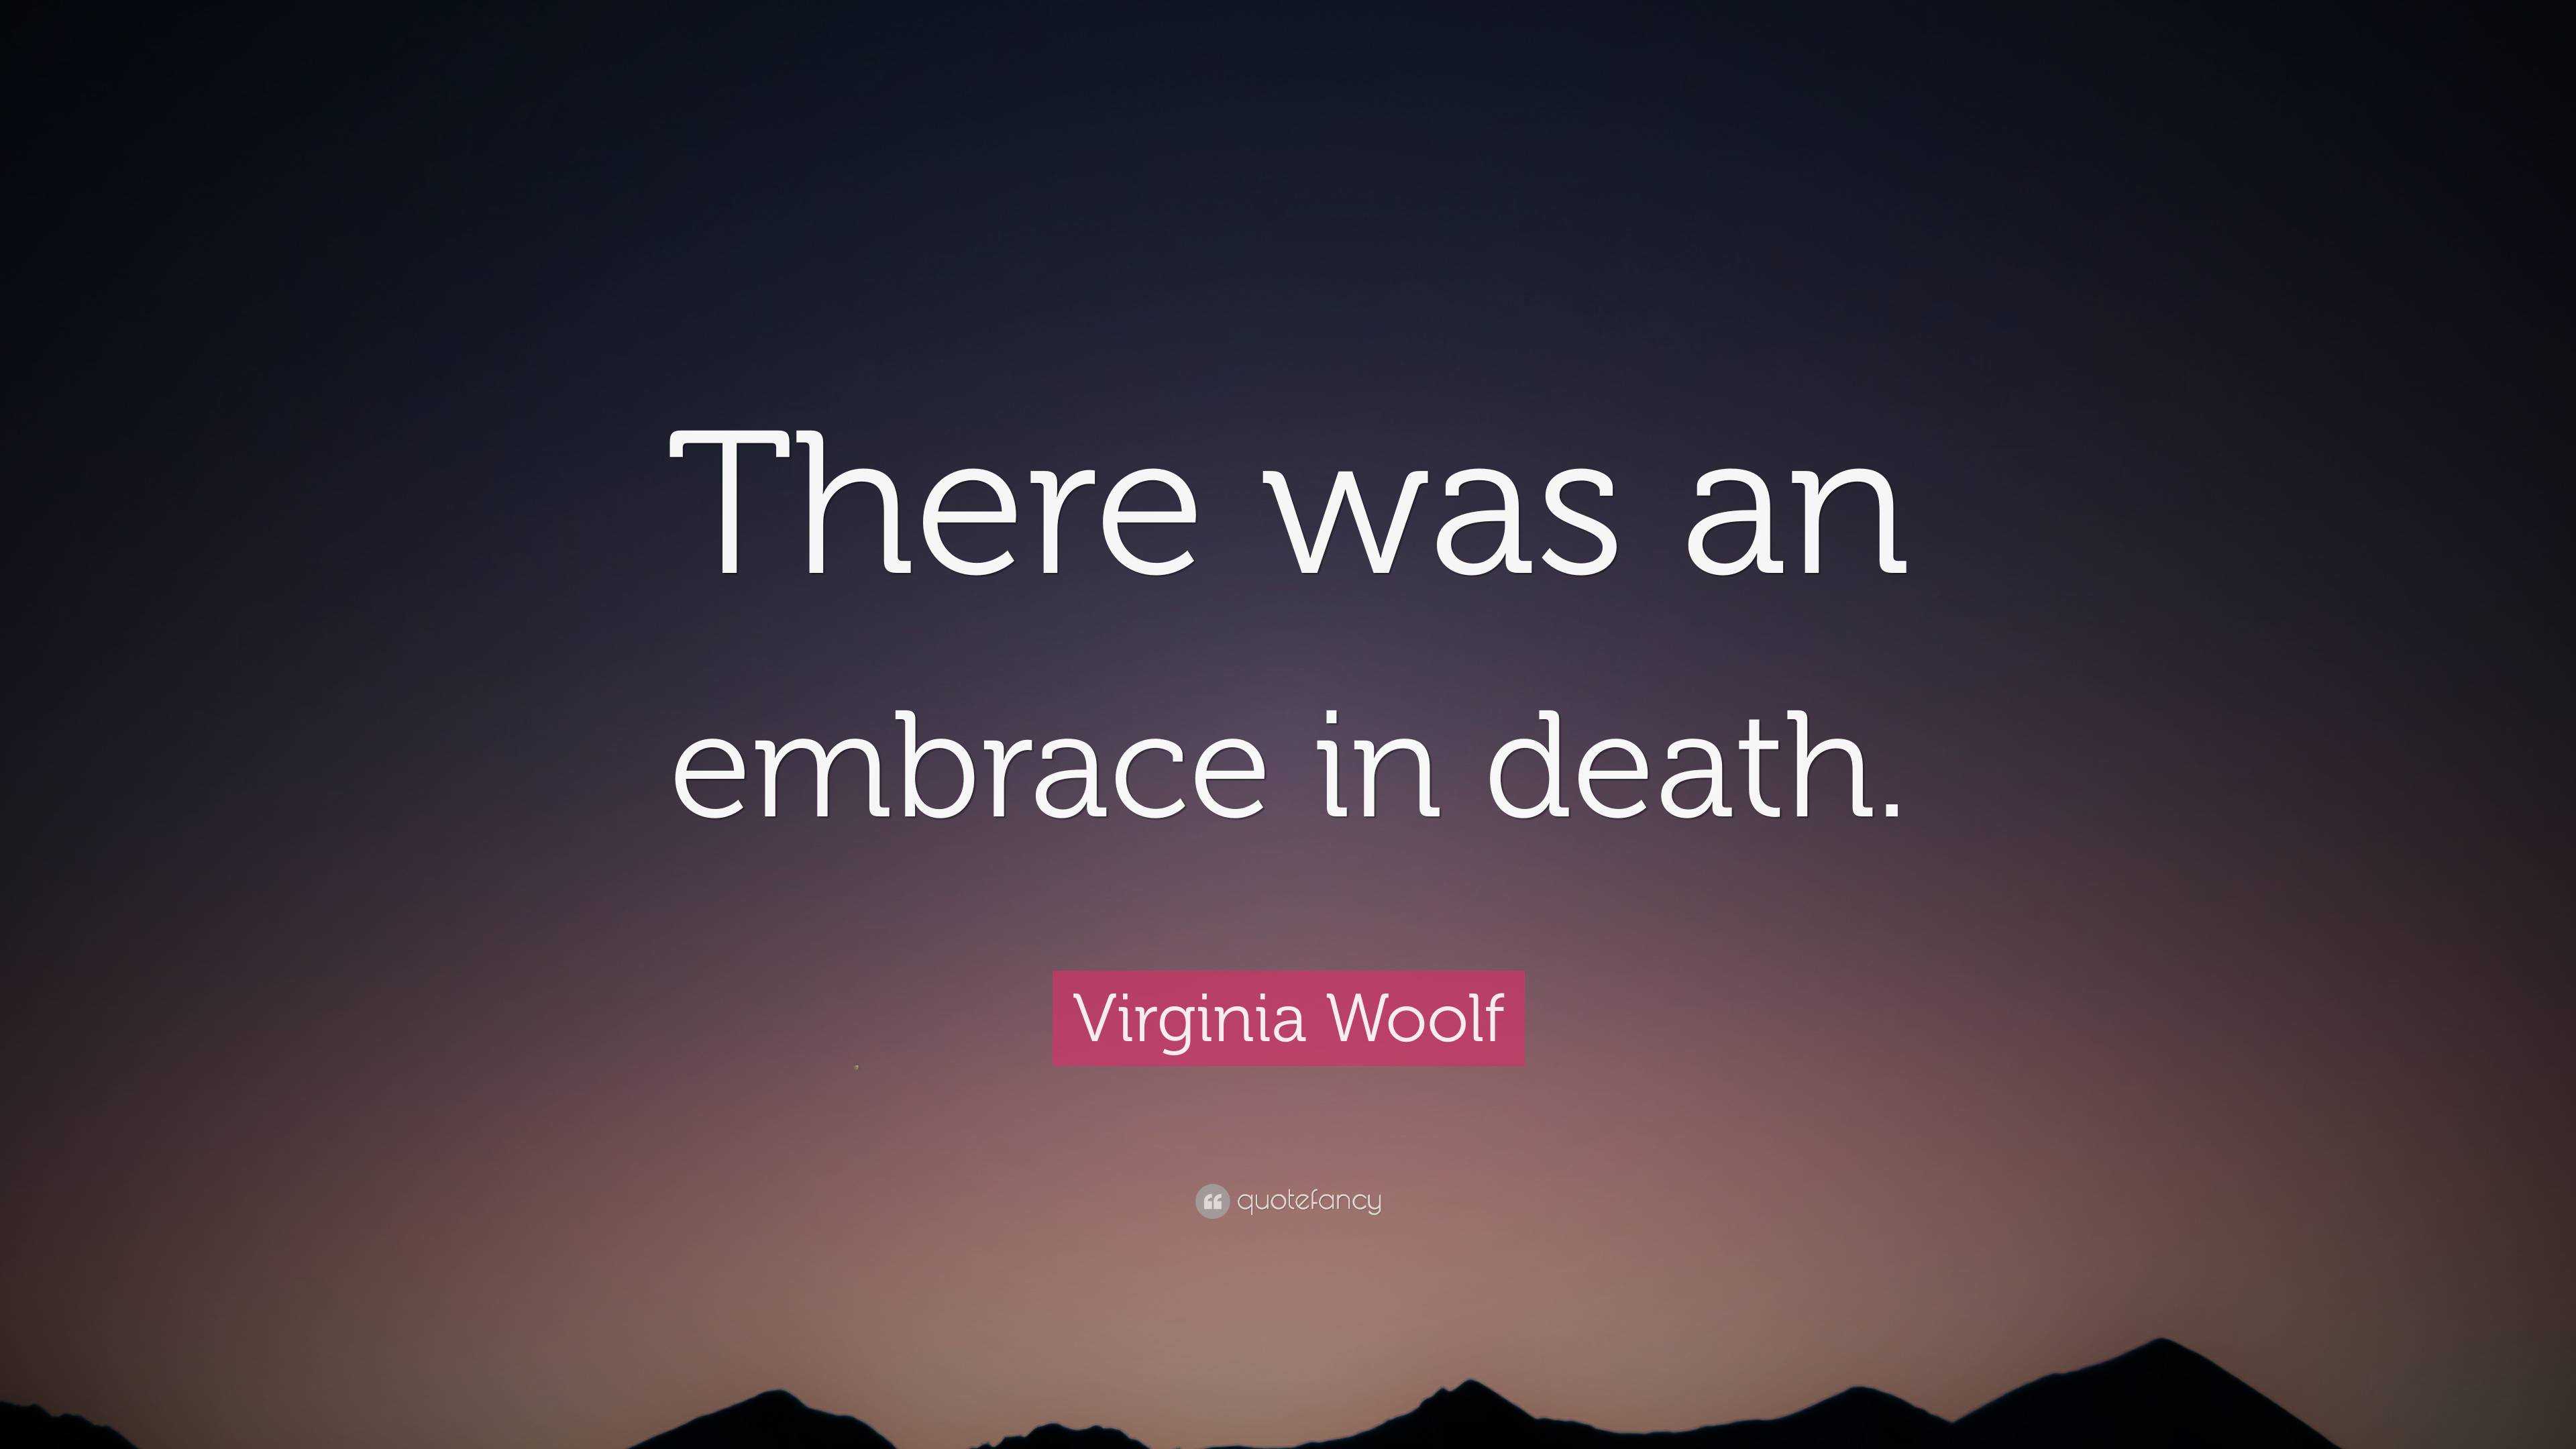 Virginia Woolf Quote: “There was an embrace in death.”